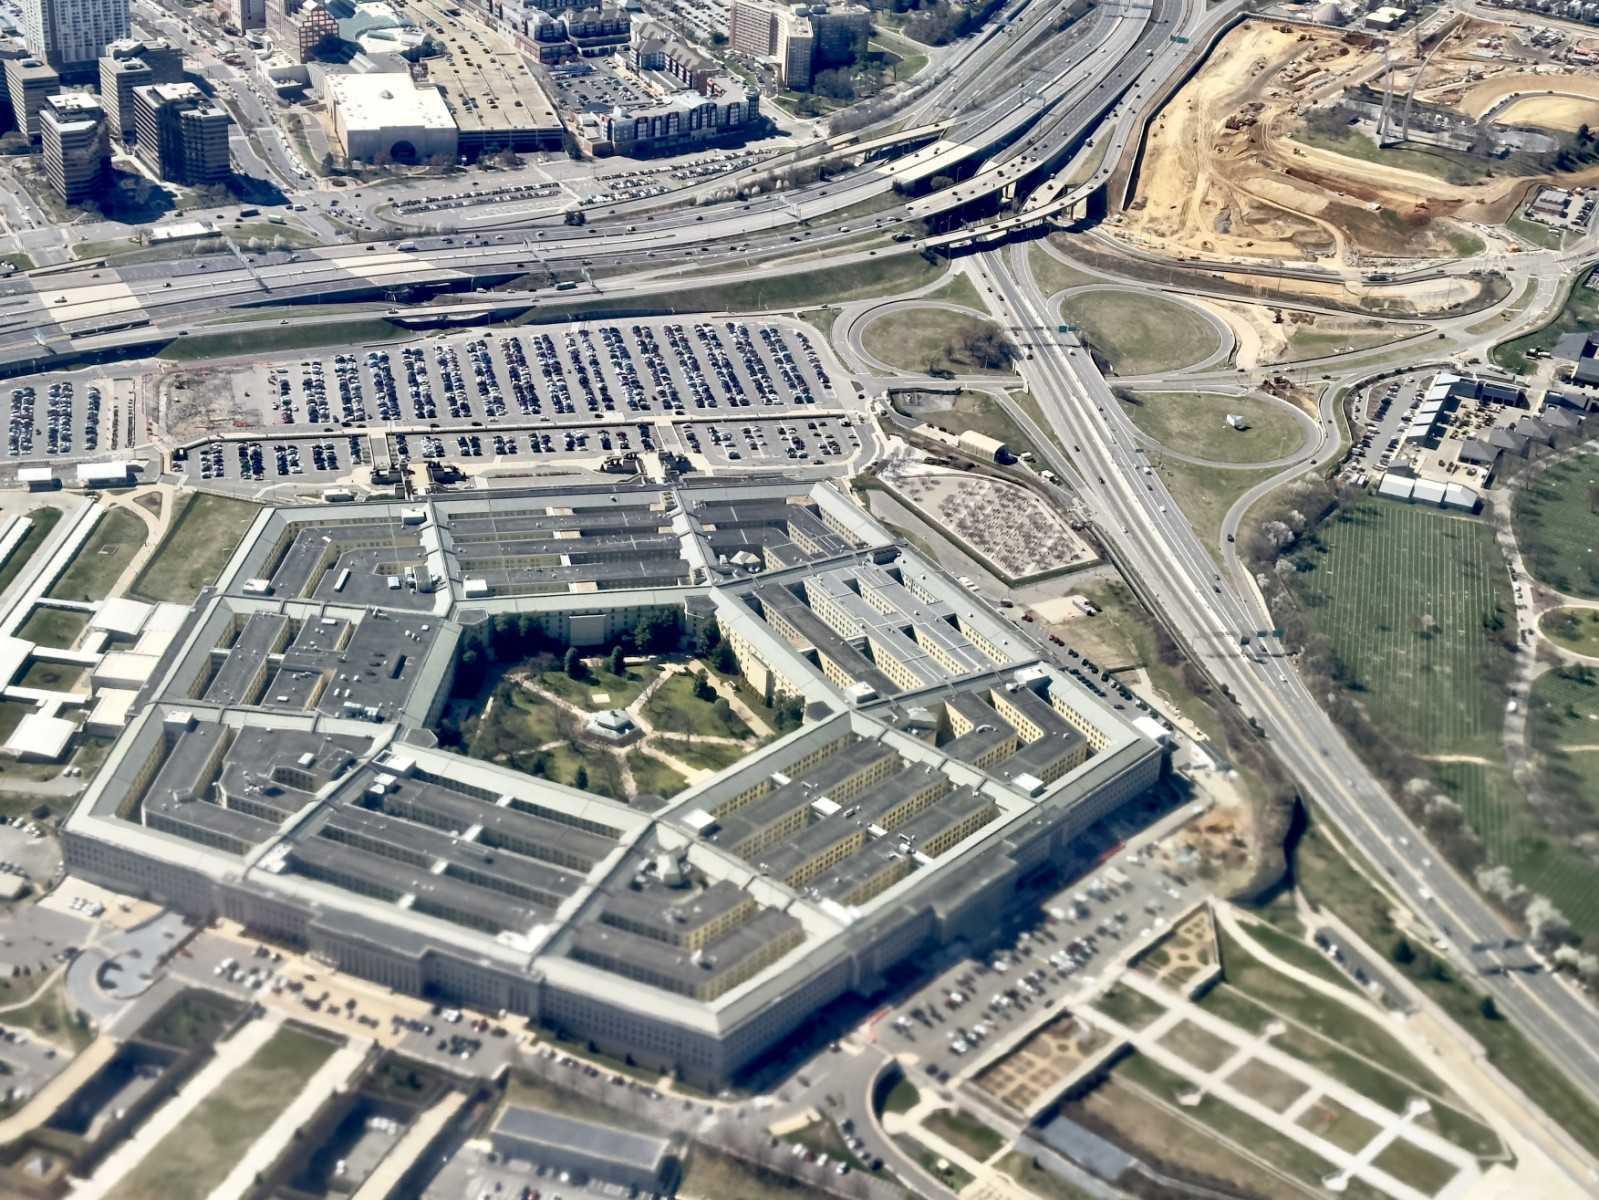 This aerial photograph taken on March 8, shows The Pentagon, the headquarters of the US Department of Defense, located in Arlington County, across the Potomac River from Washington, DC. Photo: AFP 